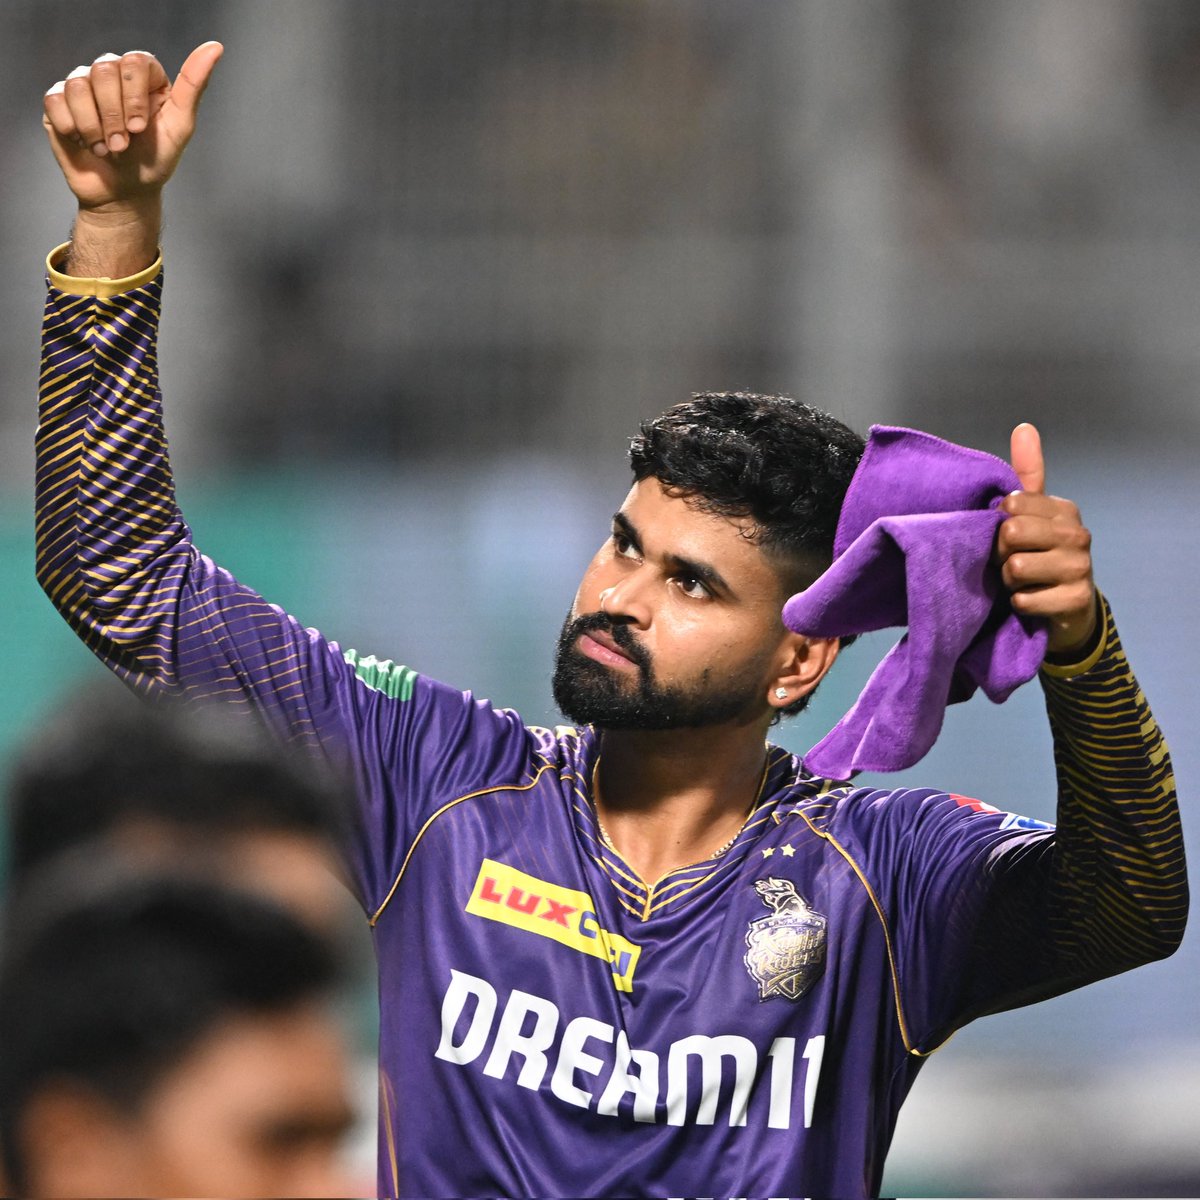 Iyer is an excellent captain and has been leading in the IPL since 2018 at a young age. While Gambhir would receive much of the credit if KKR wins, Iyer's tactical skills and independent decisions on the field mean he also deserves recognition. #KKRvsSRH